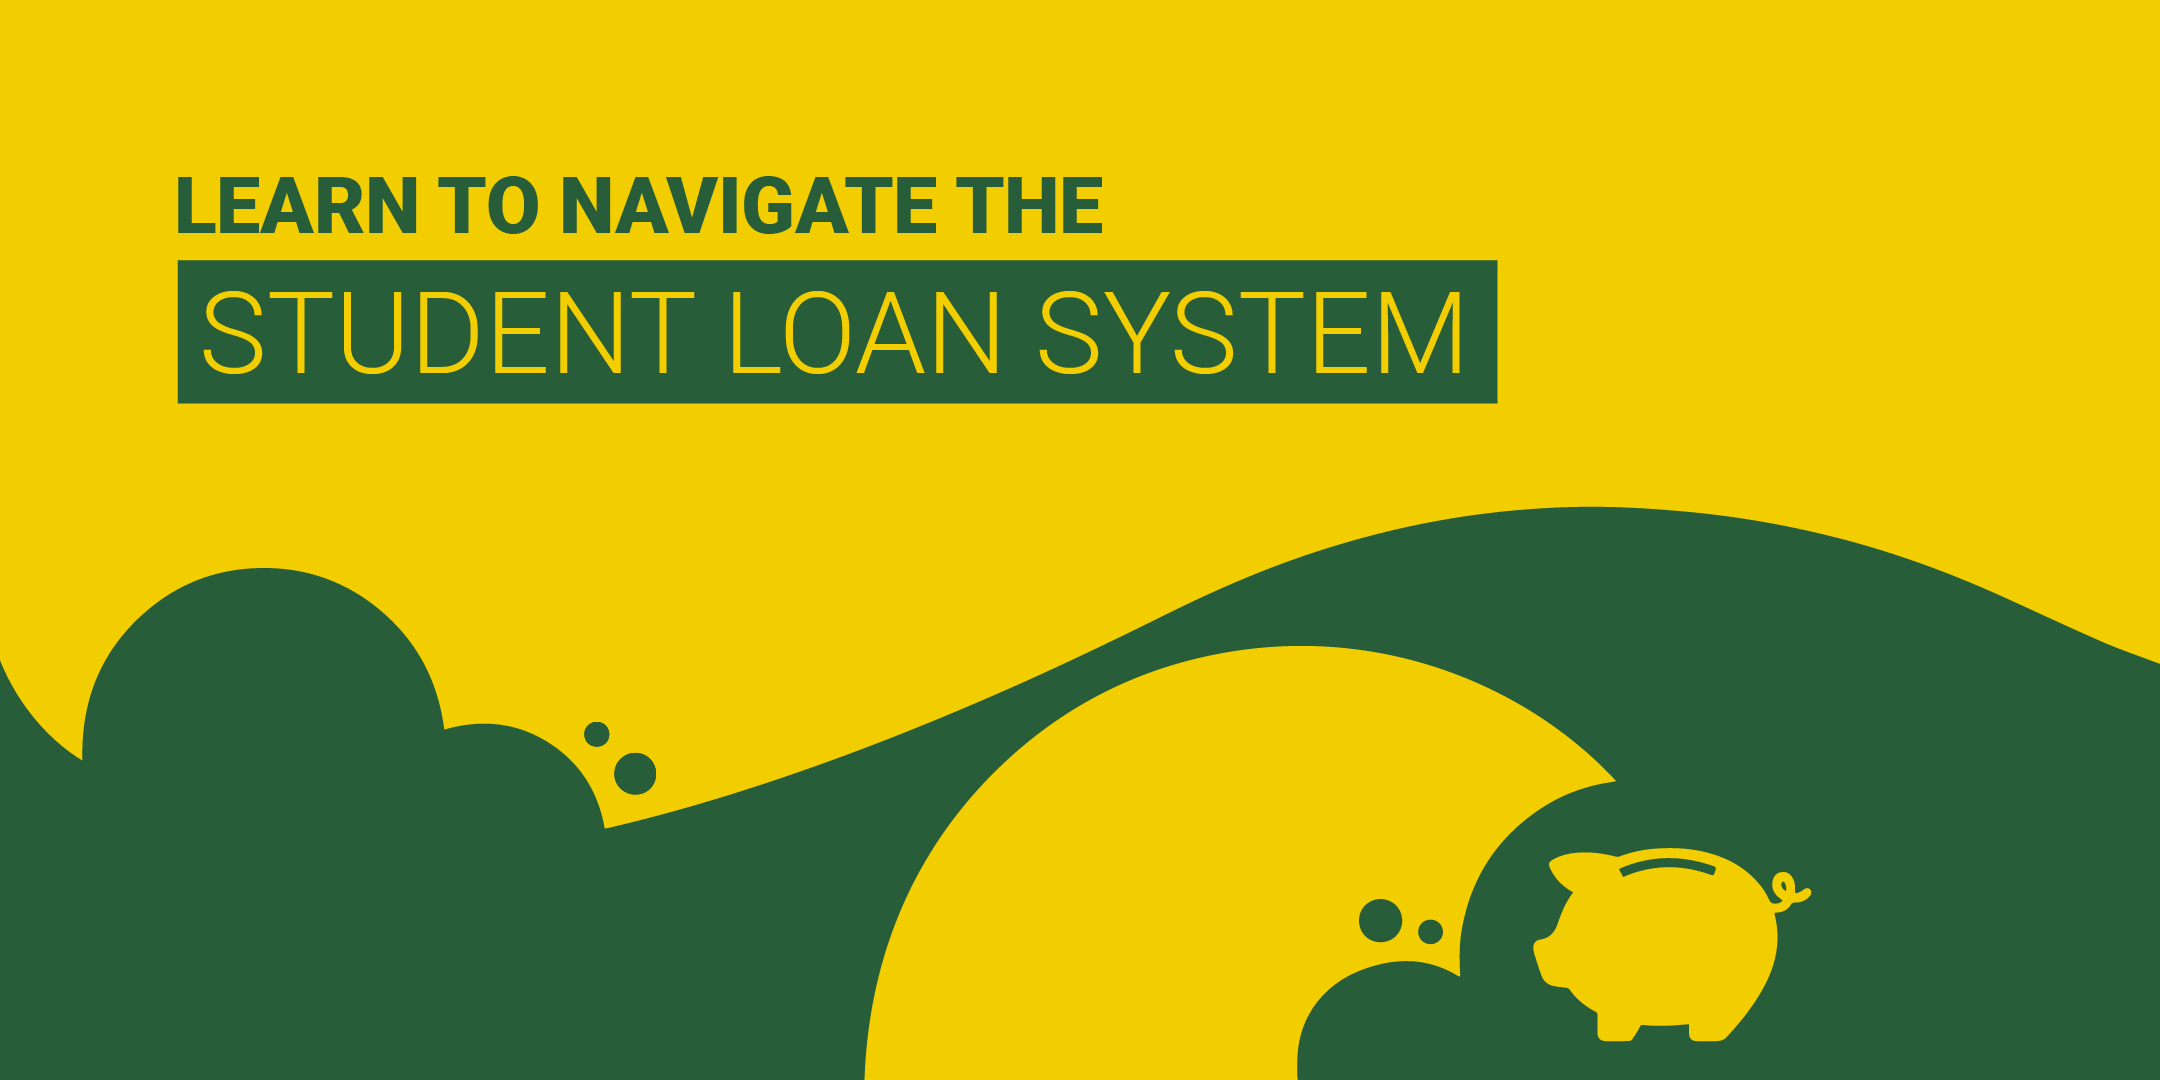 Learn to navigate the student loan system